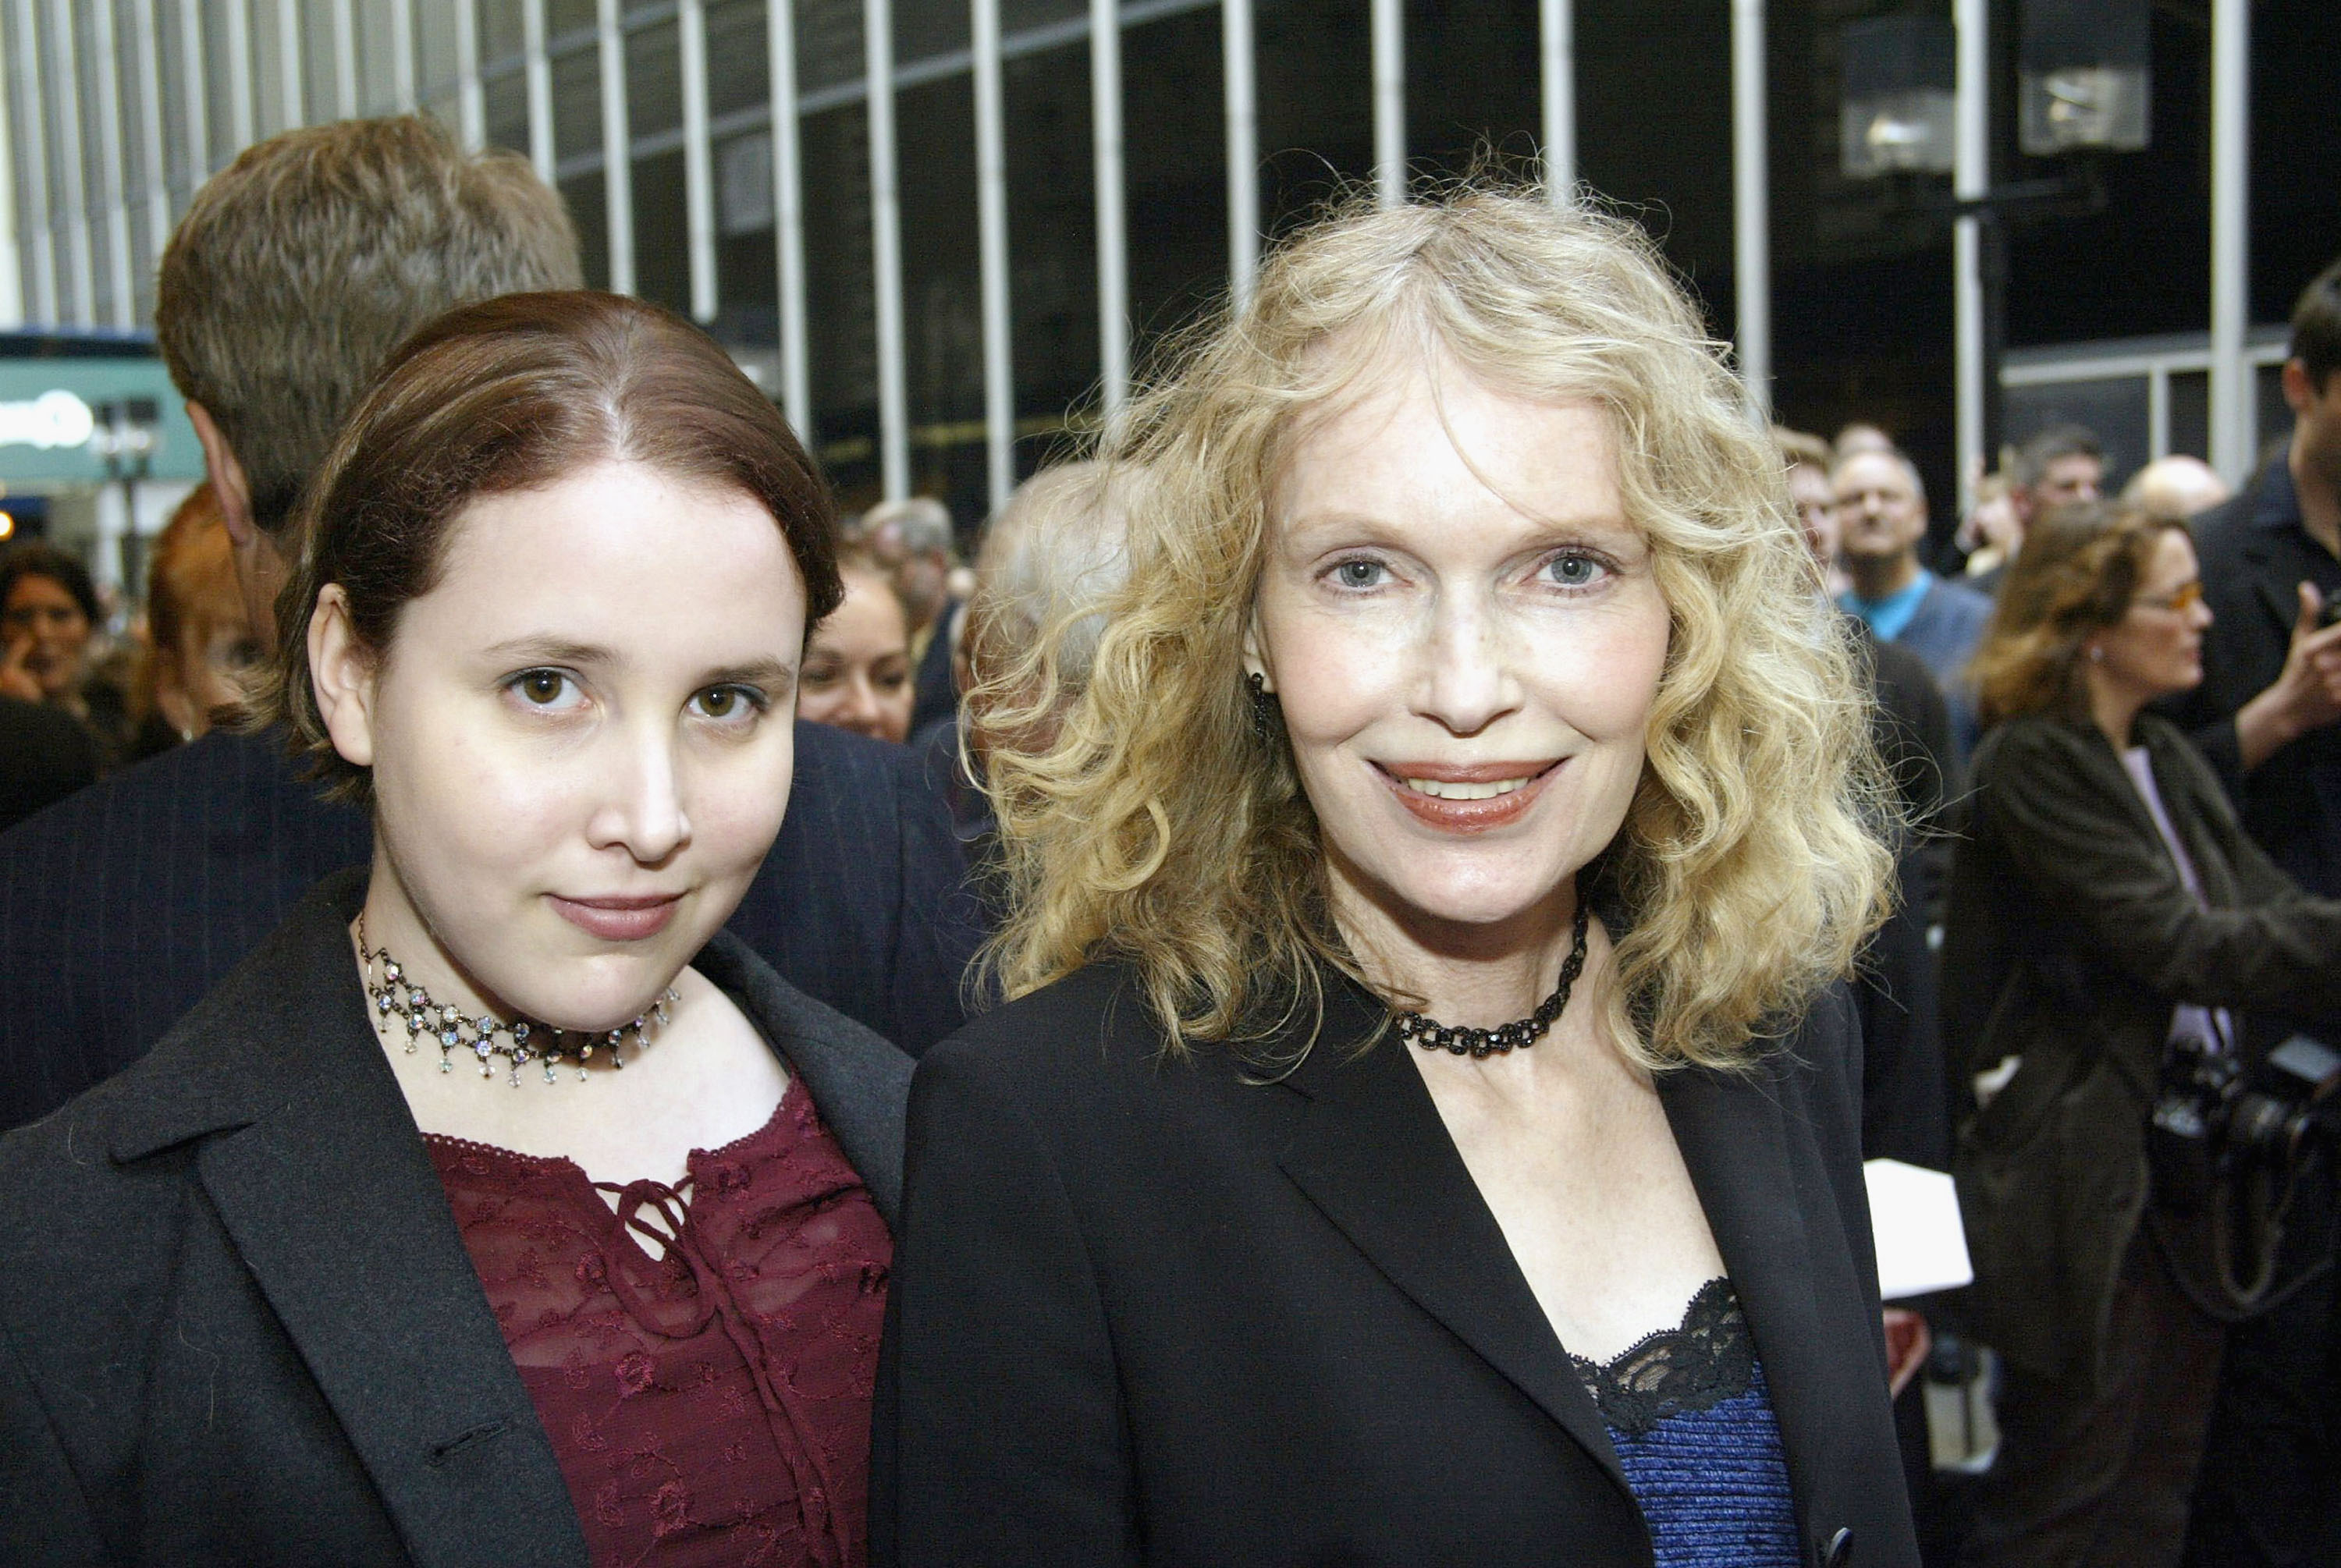 Mia Farrow and daughter Malone Farrow arrive at the Opening Night of "Gypsy" on Broadway at The Shubert Theatre on May 1, 2003 in New York City. (Bruce Glikas/Getty Images)